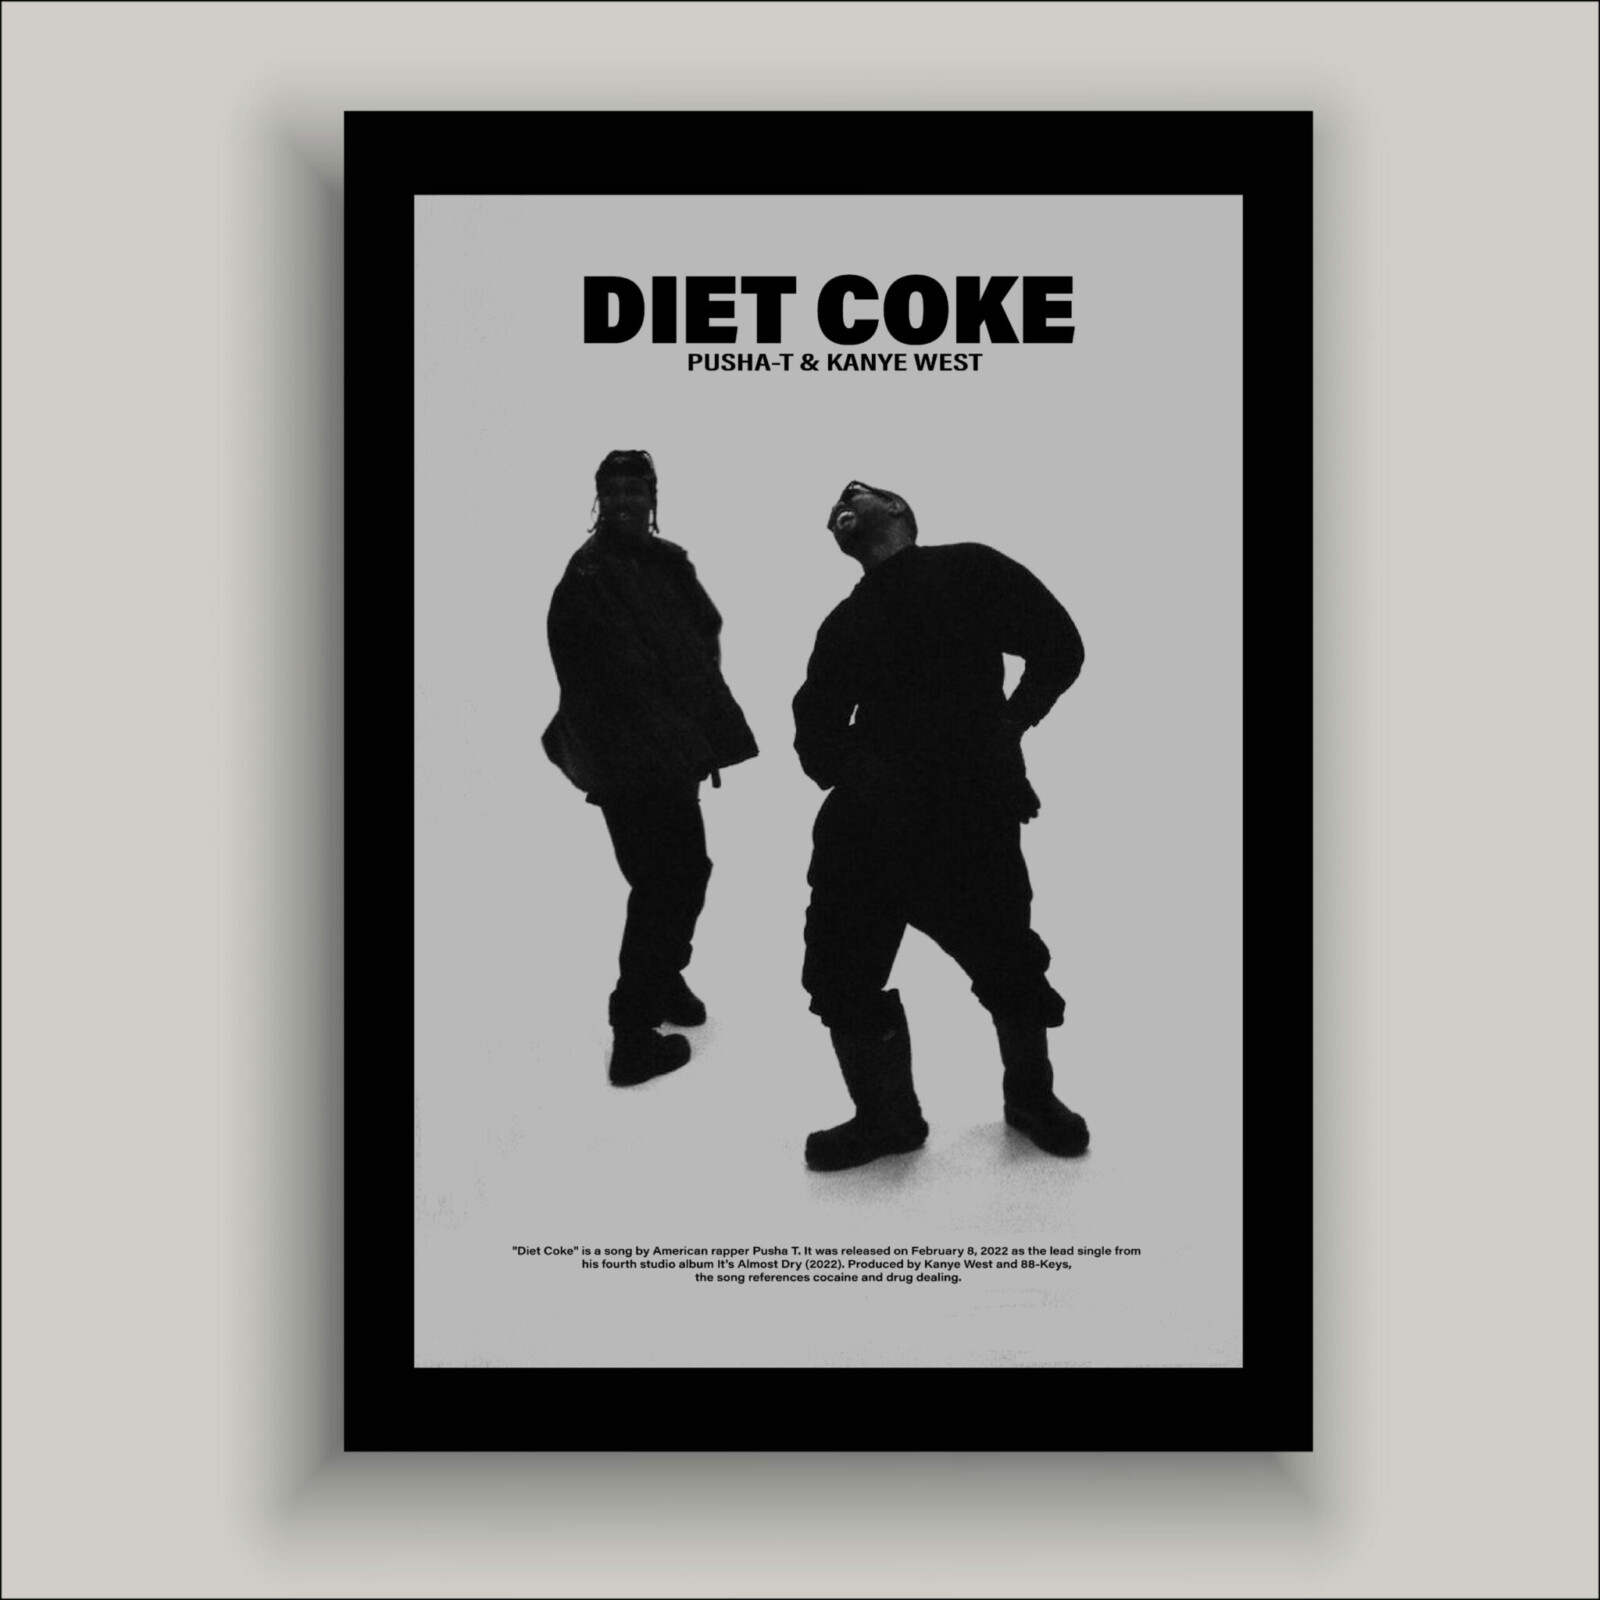 DIET COKE BY PUSHA T AND KANYE WEST MINIMAL POSTER